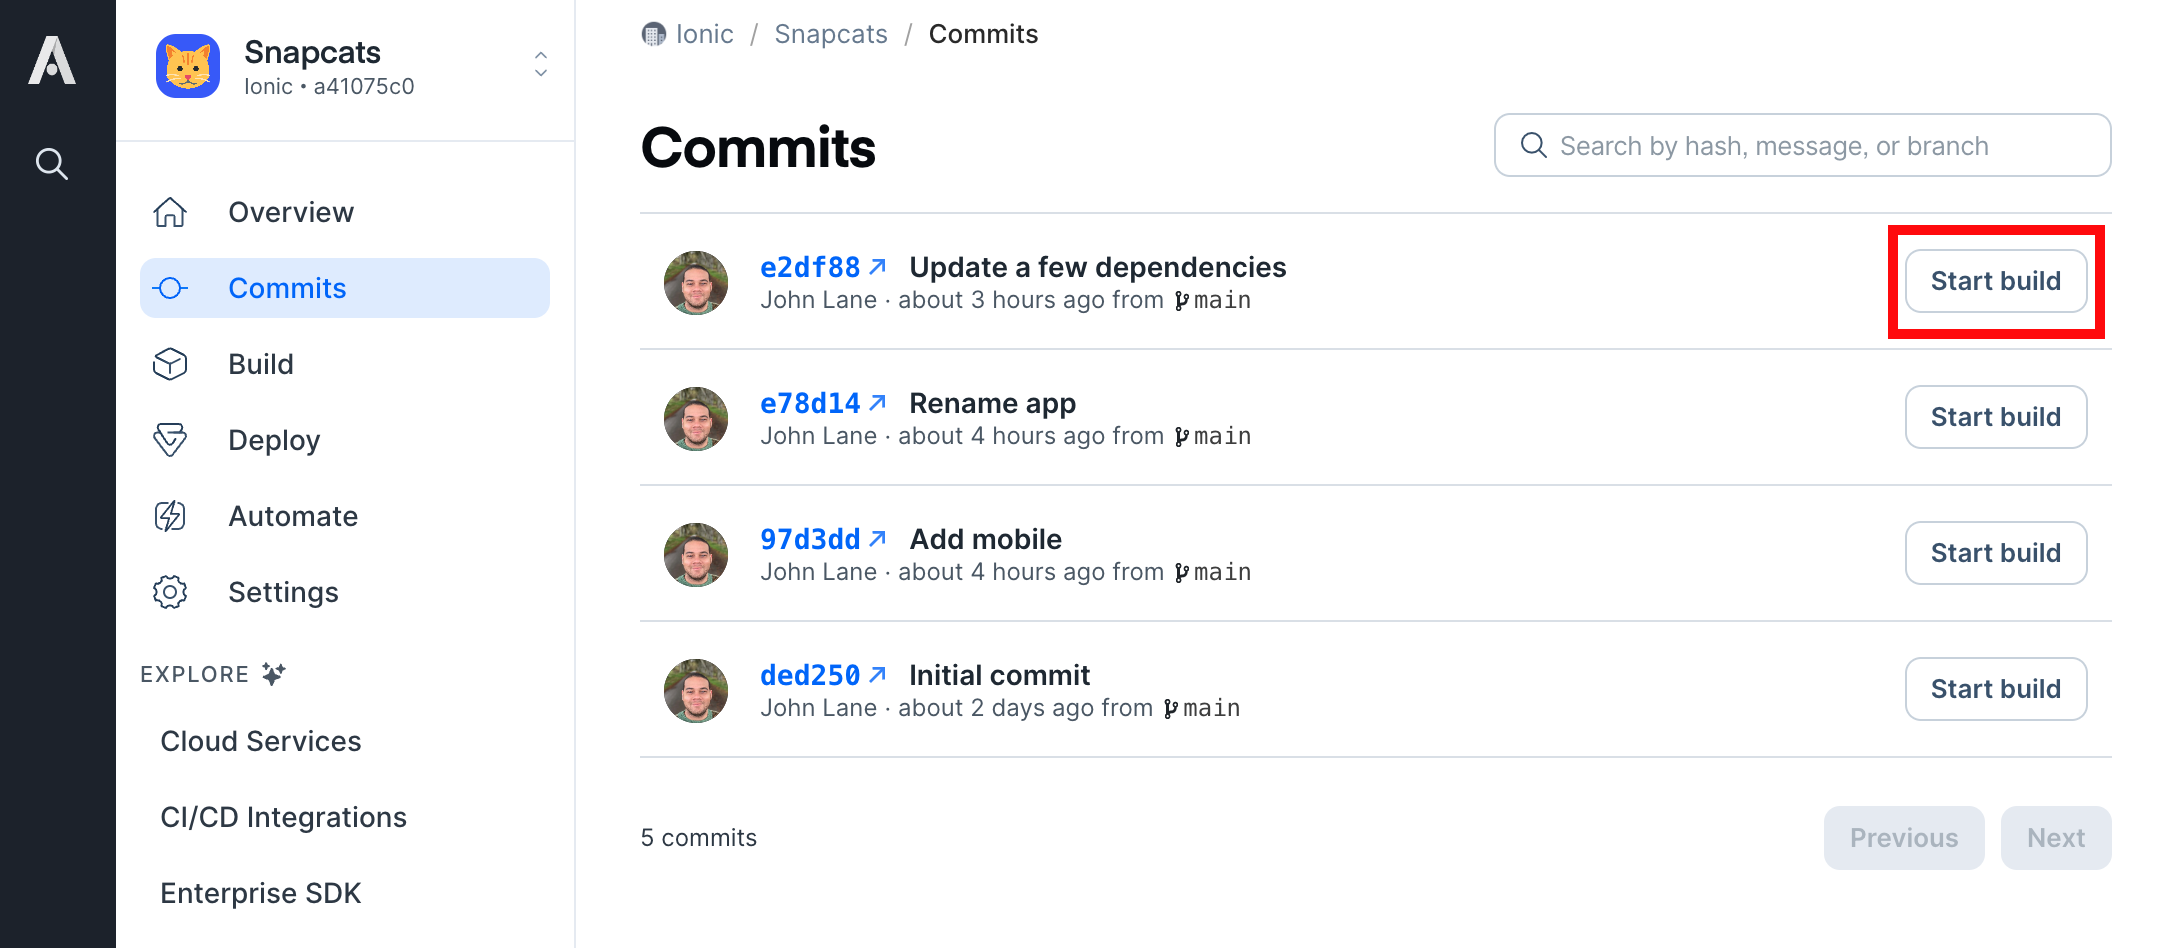 Start Build from Commits